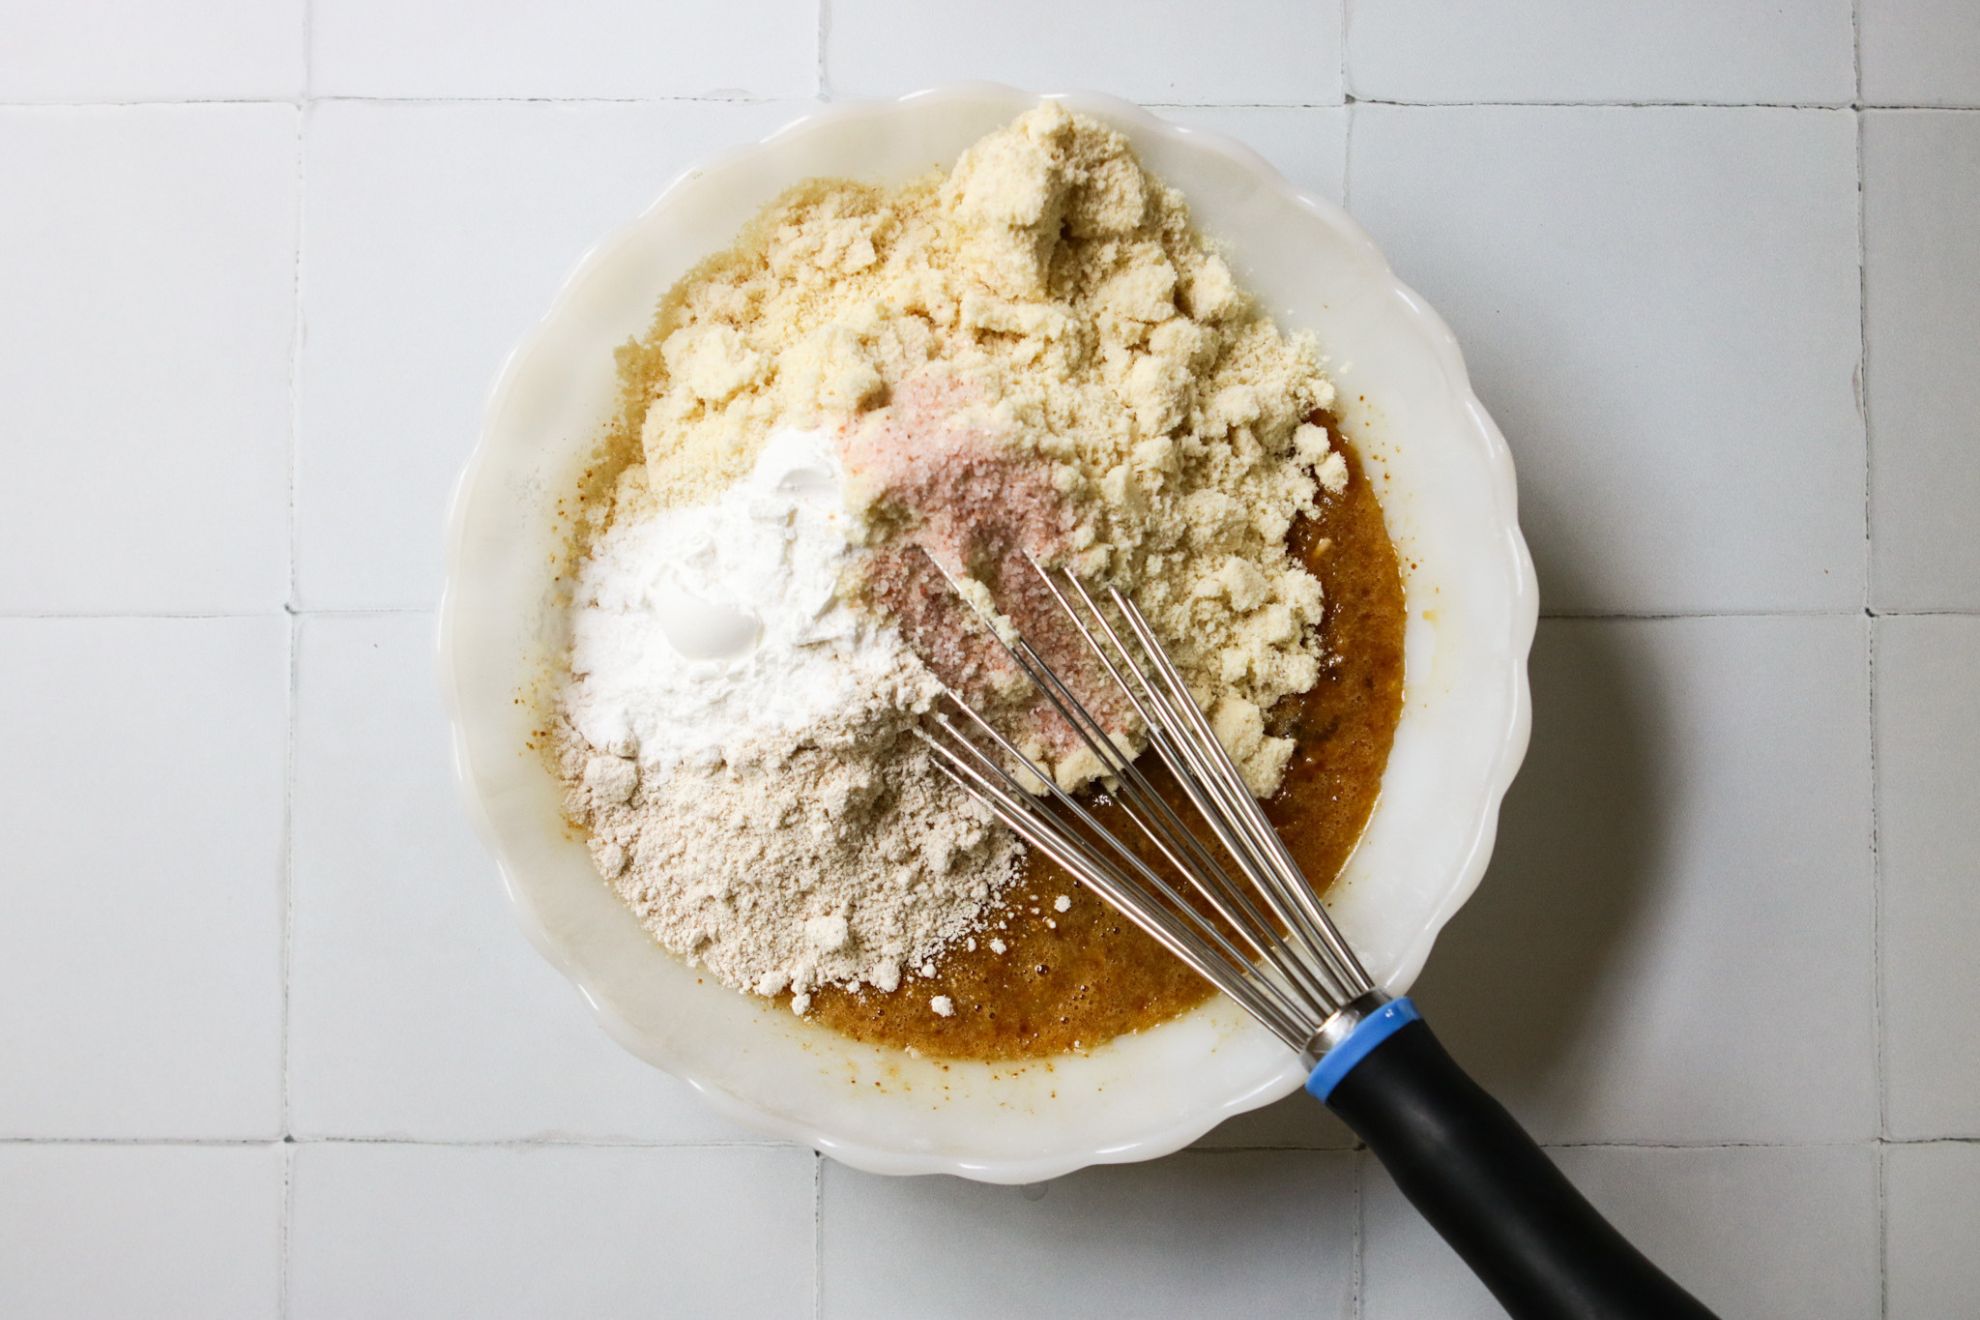 This is an overhead horizontal image of a scalloped milk glass bowl with almond flour, oat flour, salt, and baking powder in it. Underneath the dry ingredients are wet ingredients mixed together. A whisk is in the bowl, leaning against the side with the handle pointing to the bottom right corner of the image. The bowl sits on a white tiled surface.